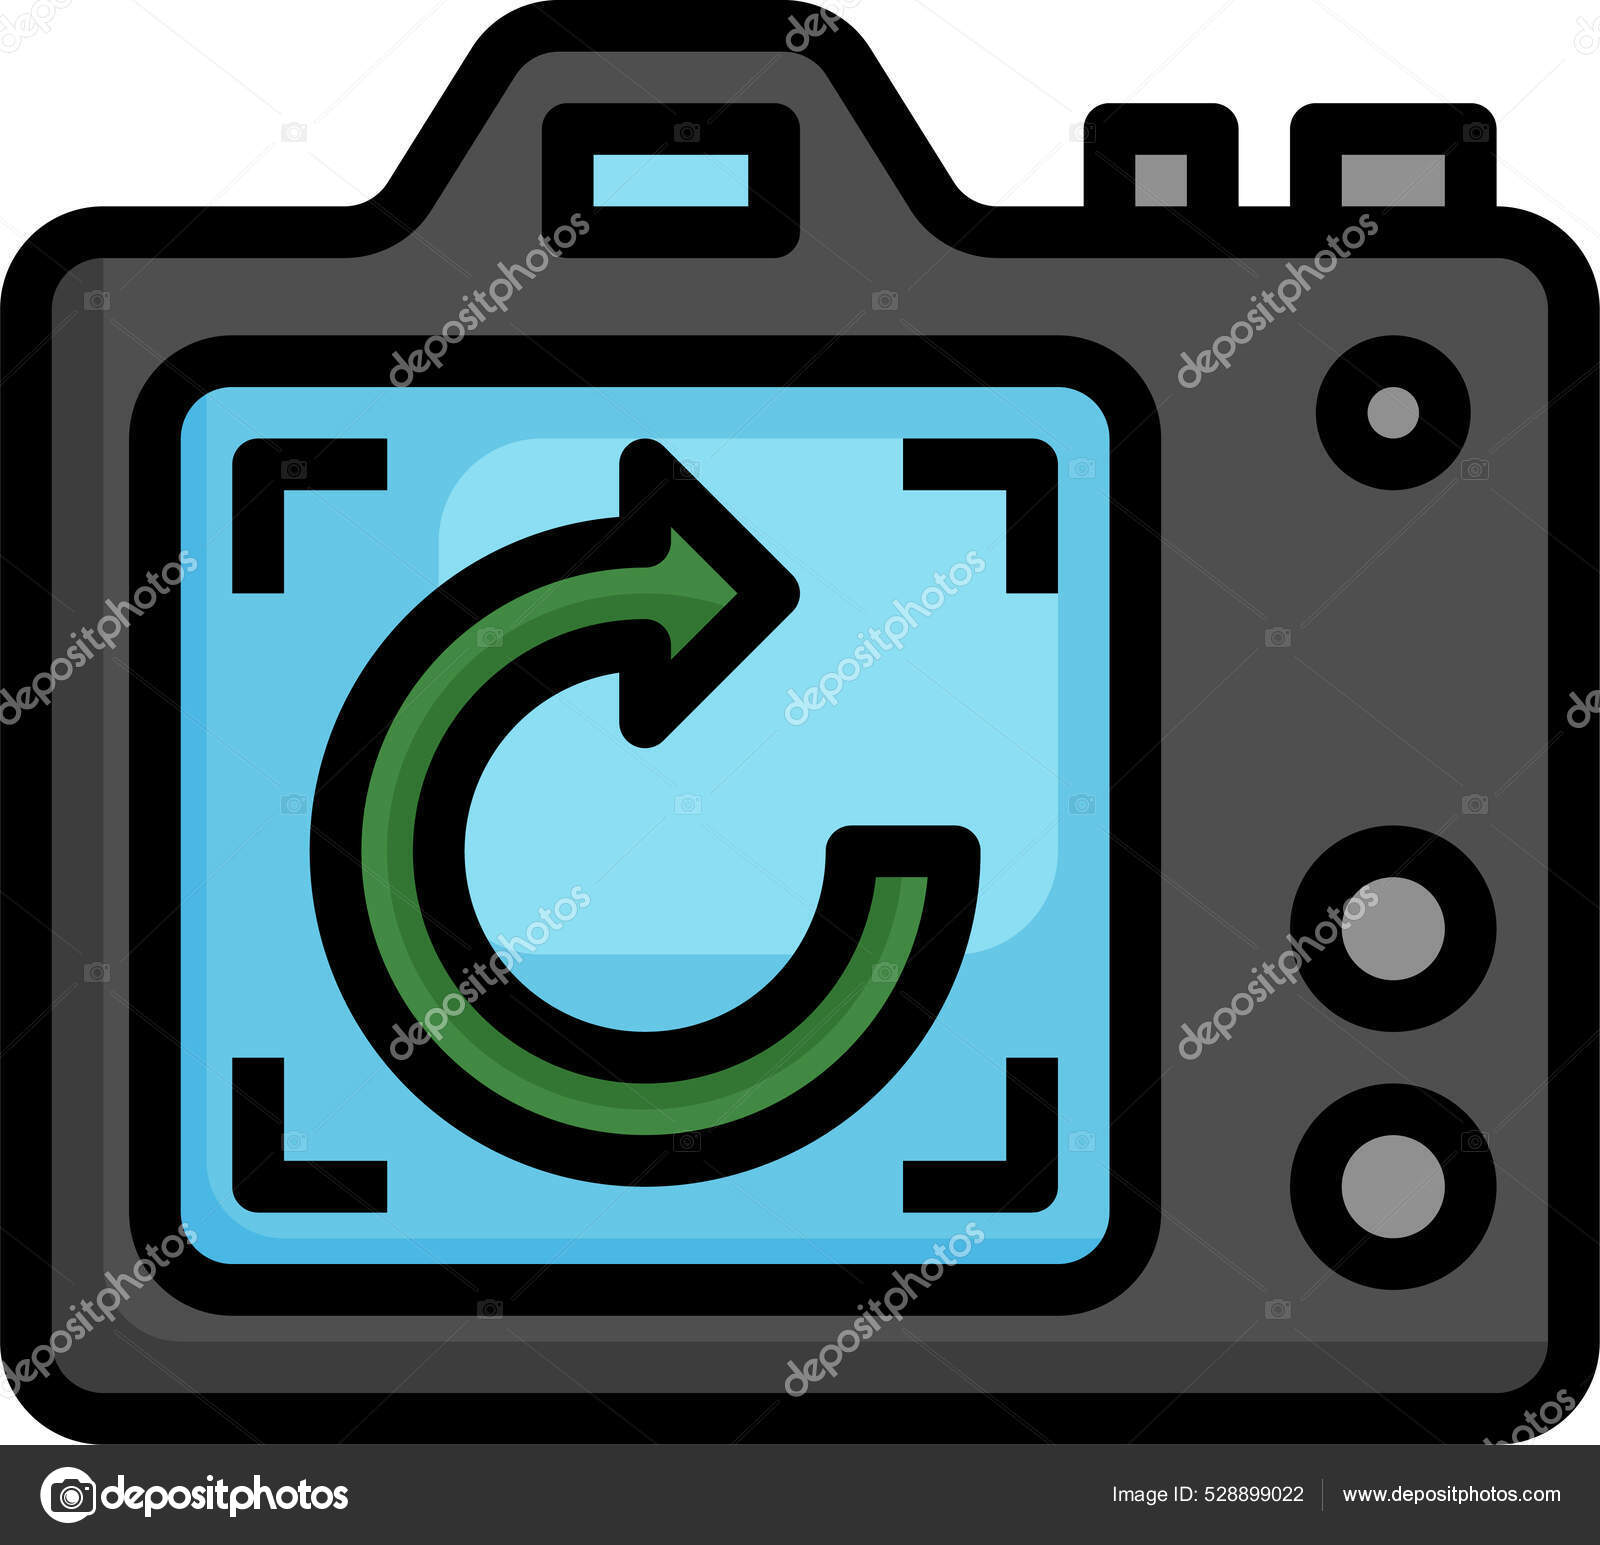 49,080 Top Rated Icon Images, Stock Photos, 3D objects, & Vectors